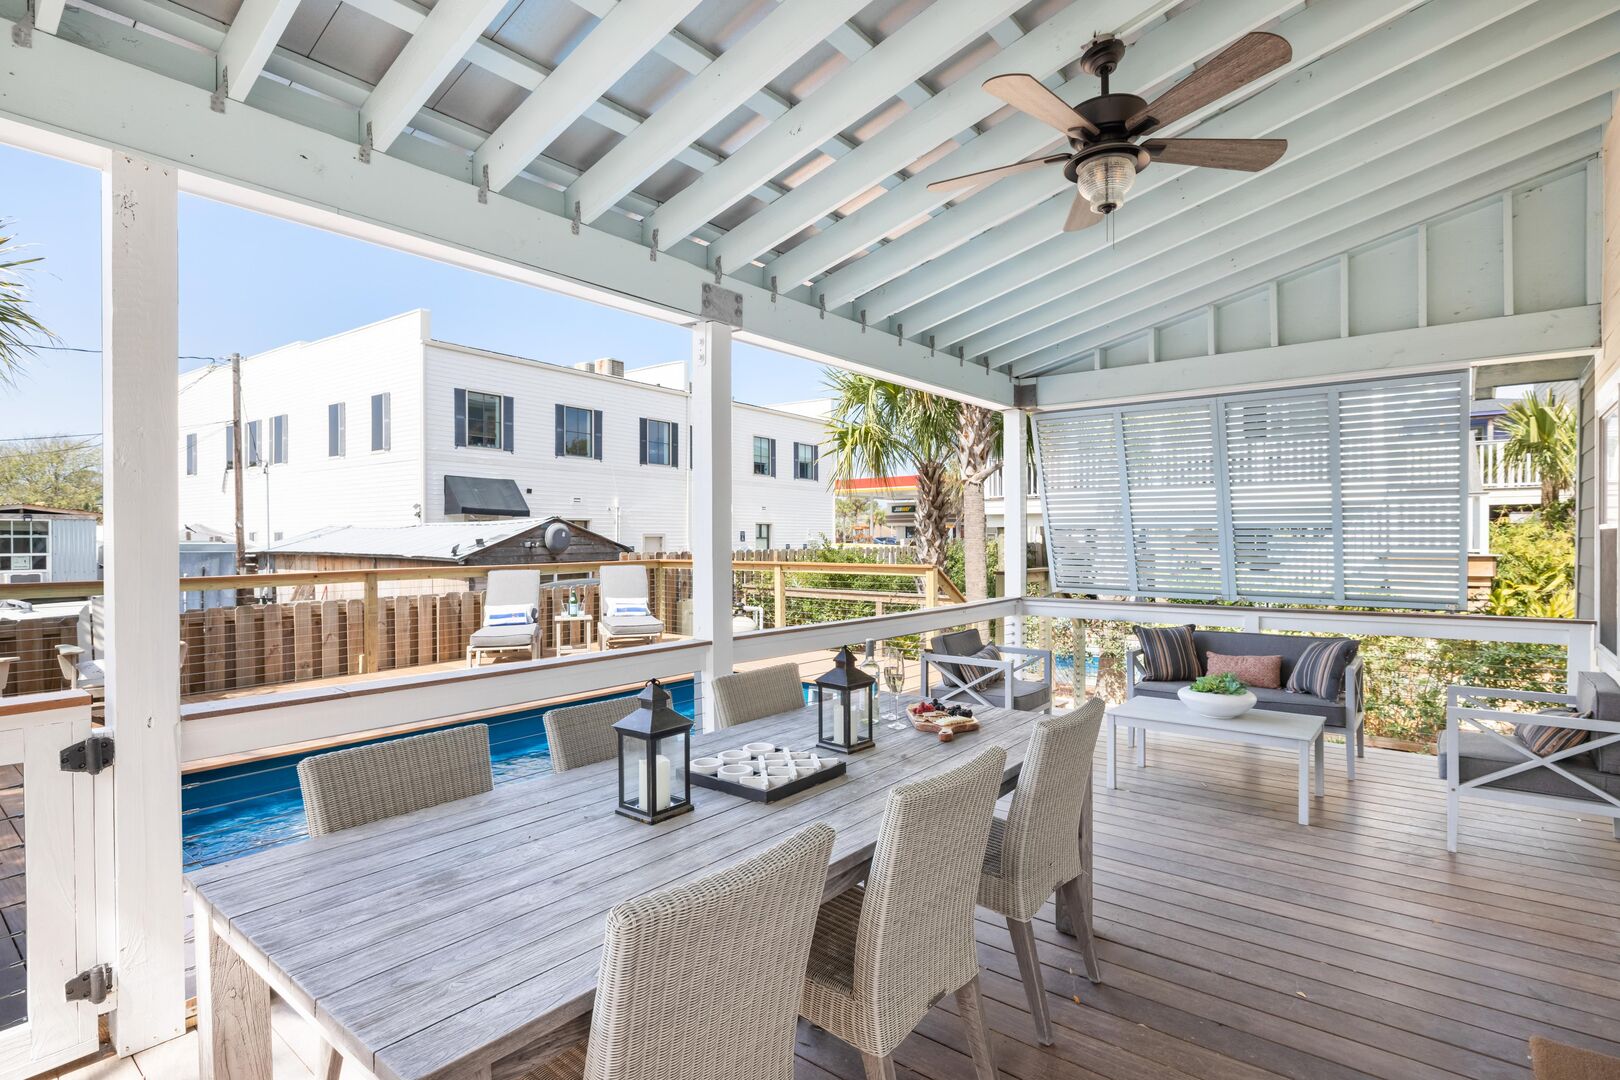 Expansive porch space with plenty of seating for you entire family